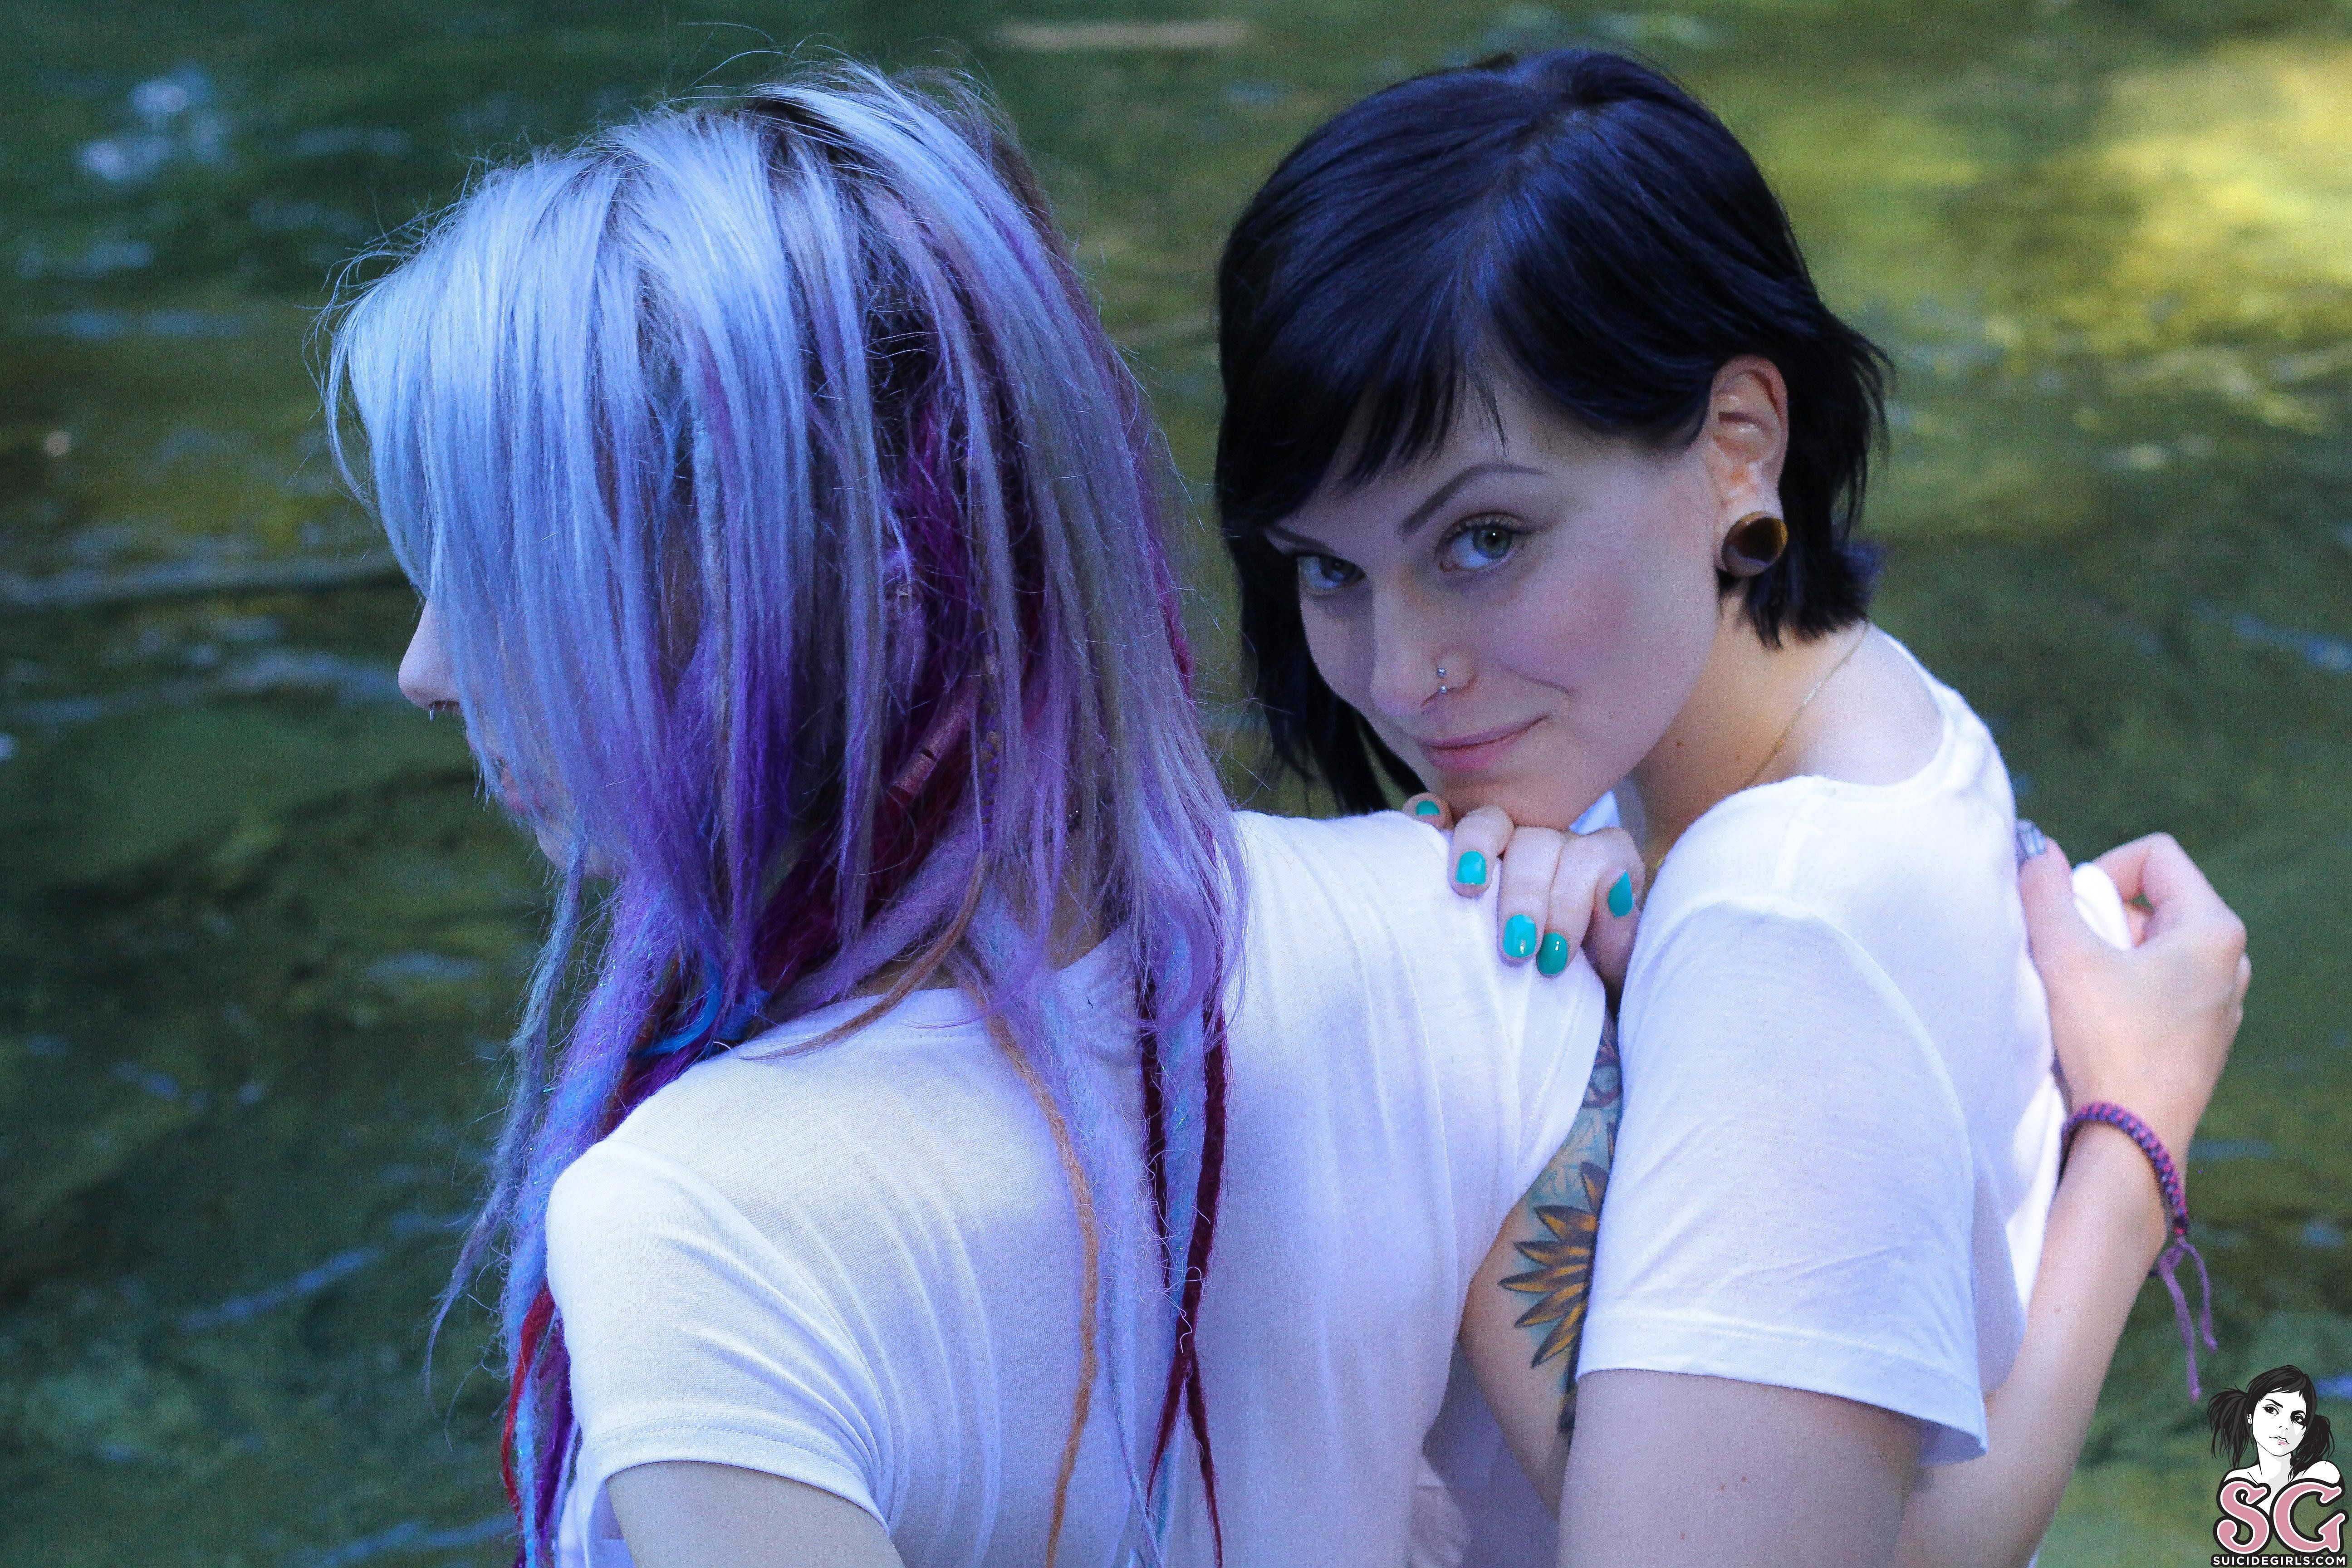 People 5184x3456 Ceres Suicide Suicide Girls piercing tattoo women blue eyes looking at viewer Stormyent Suicide T-shirt white tops women outdoors outdoors watermarked lesbians cyan nails painted nails black hair model